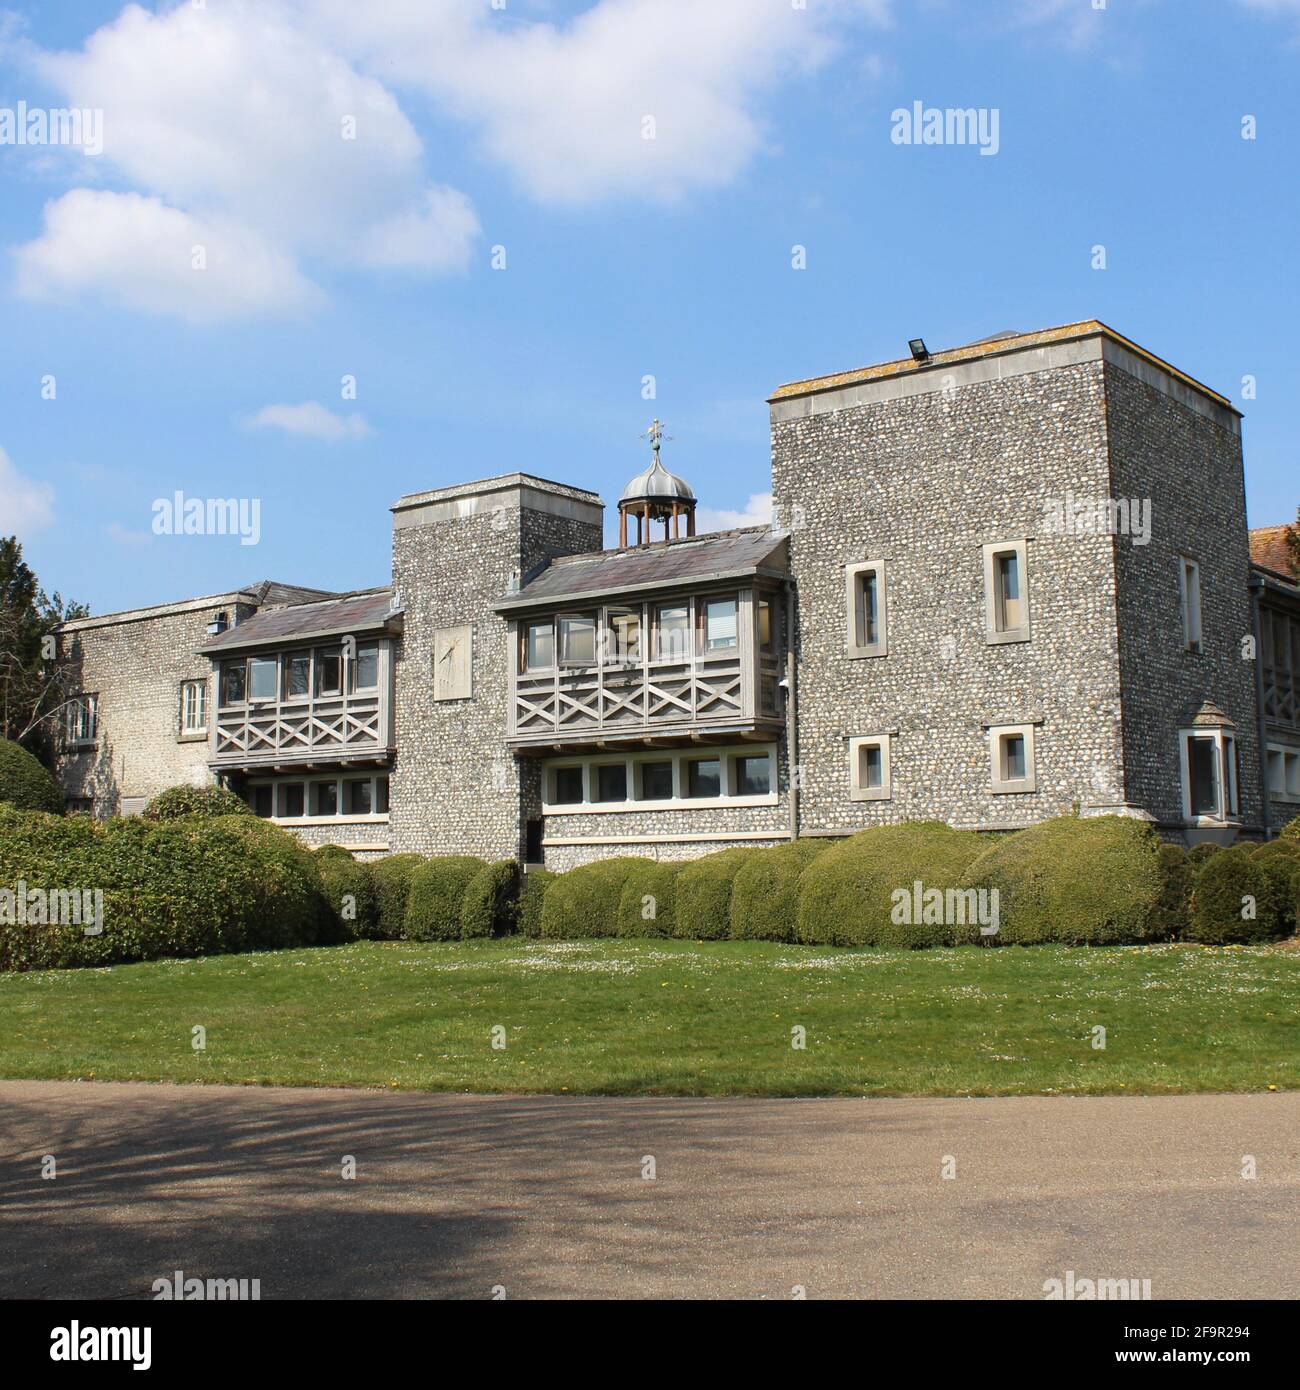 West Dean College near Chichester, West Sussex. The former home of surrealist Edward James. Photograph taken on beautiful spring day. Stock Photo